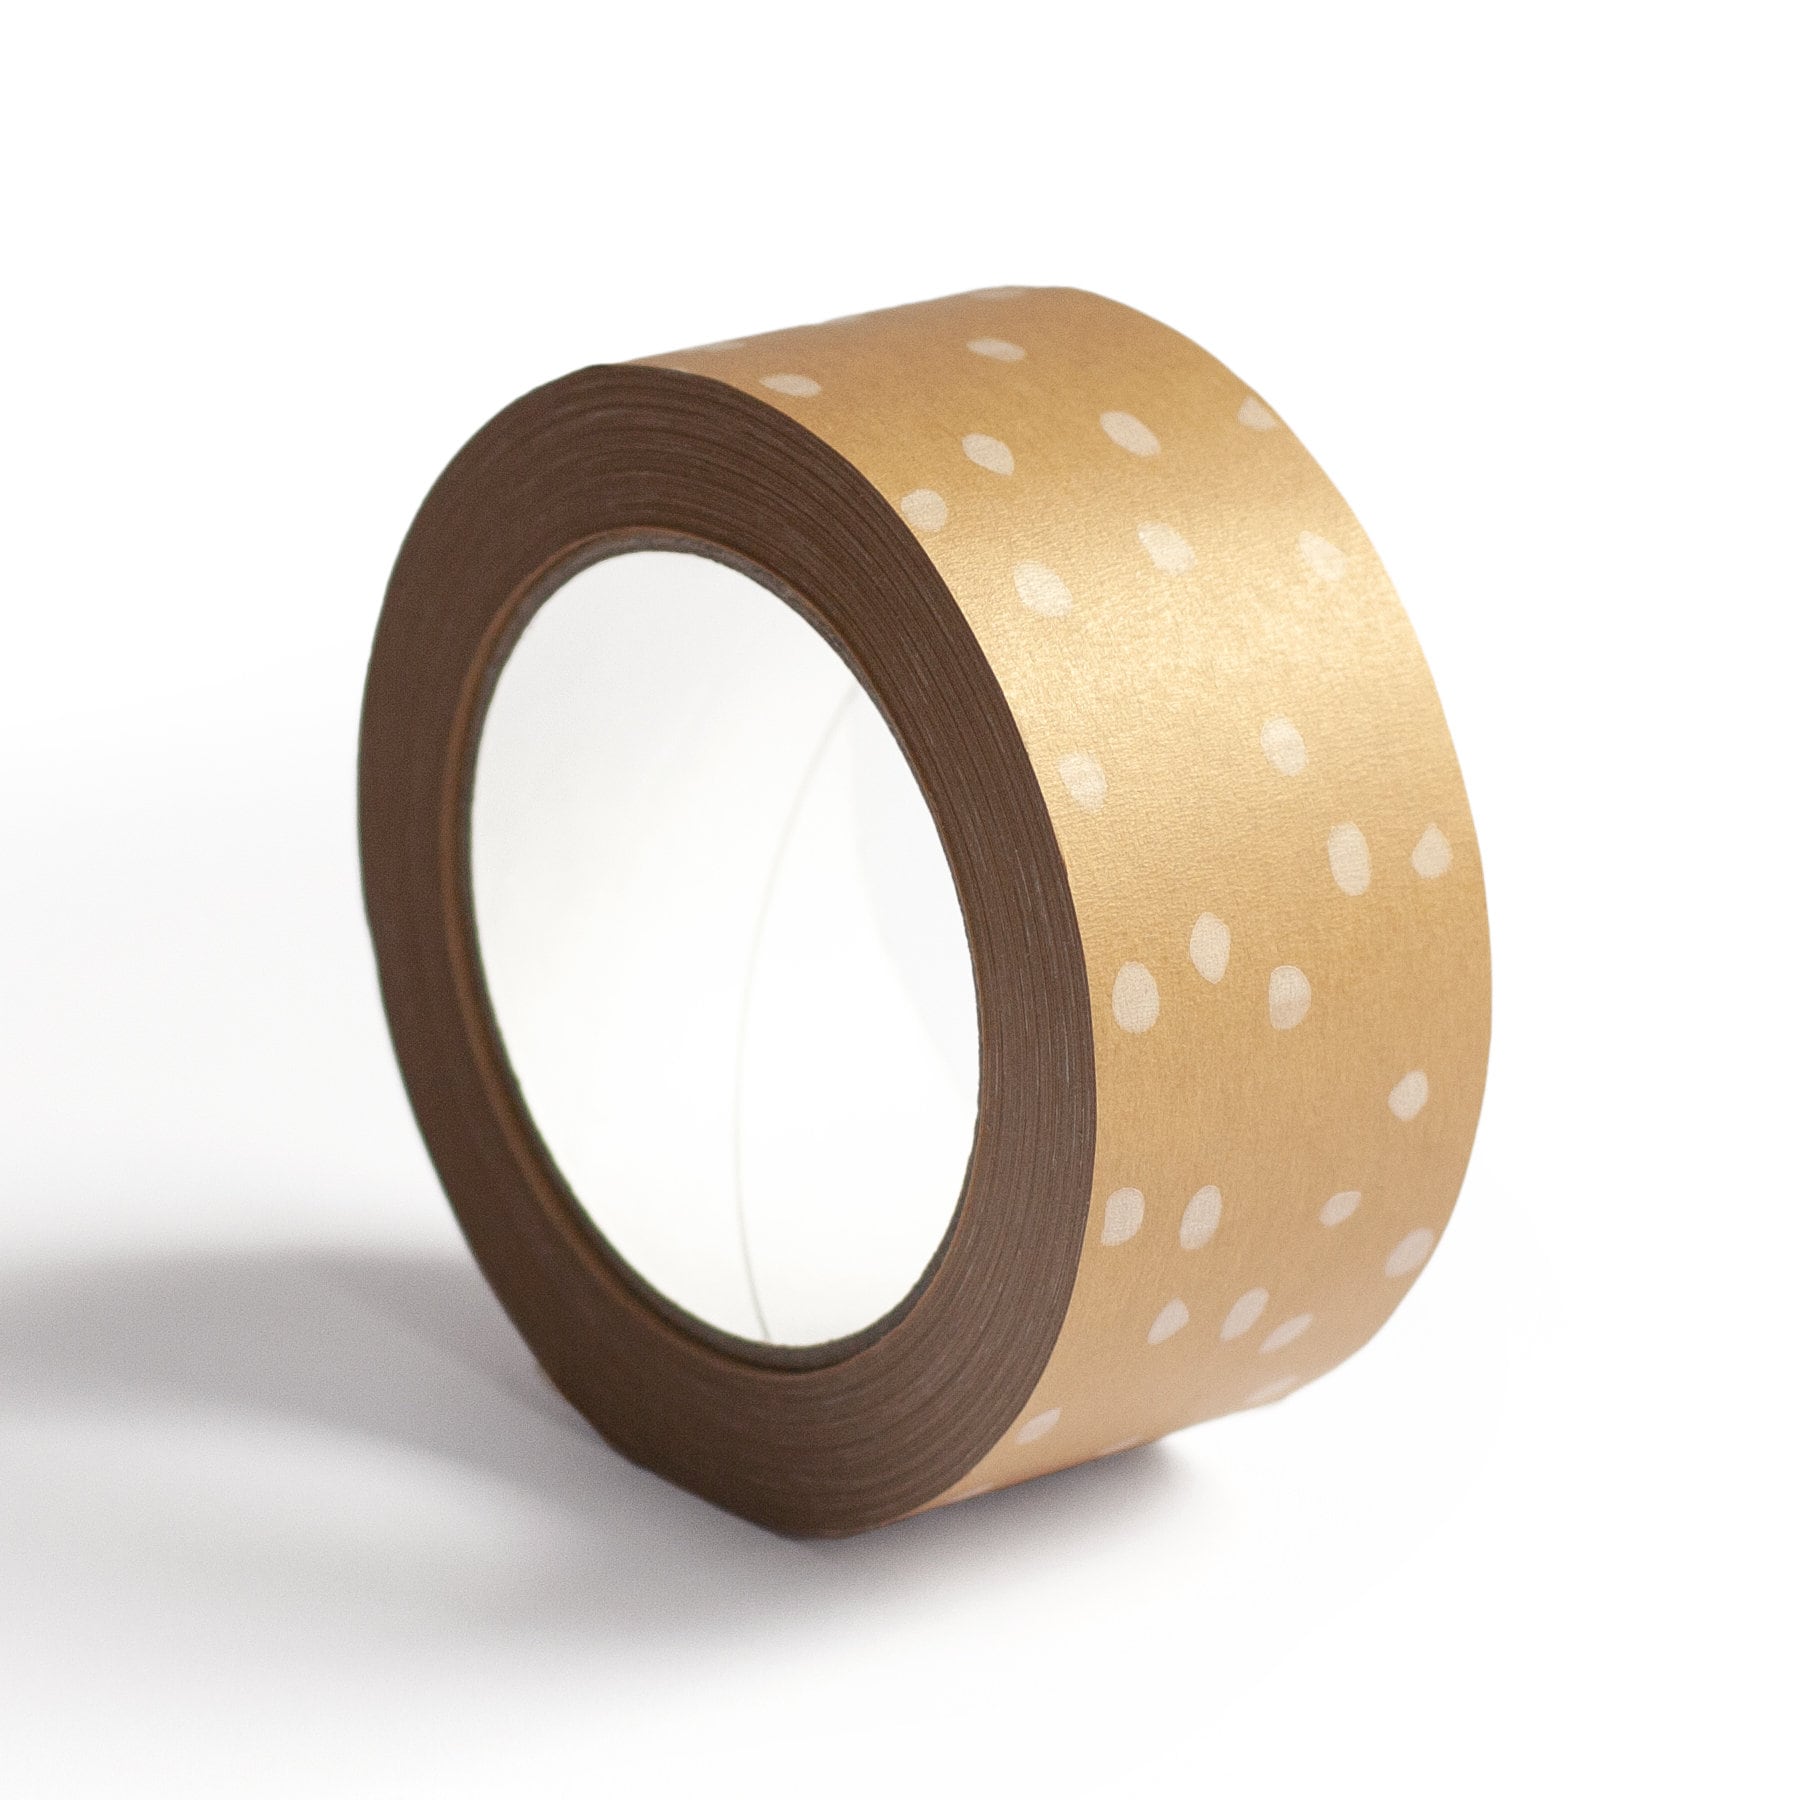 3M Scotch Washi Tape Crafting Tape Polka Dot Paper Sticker Package